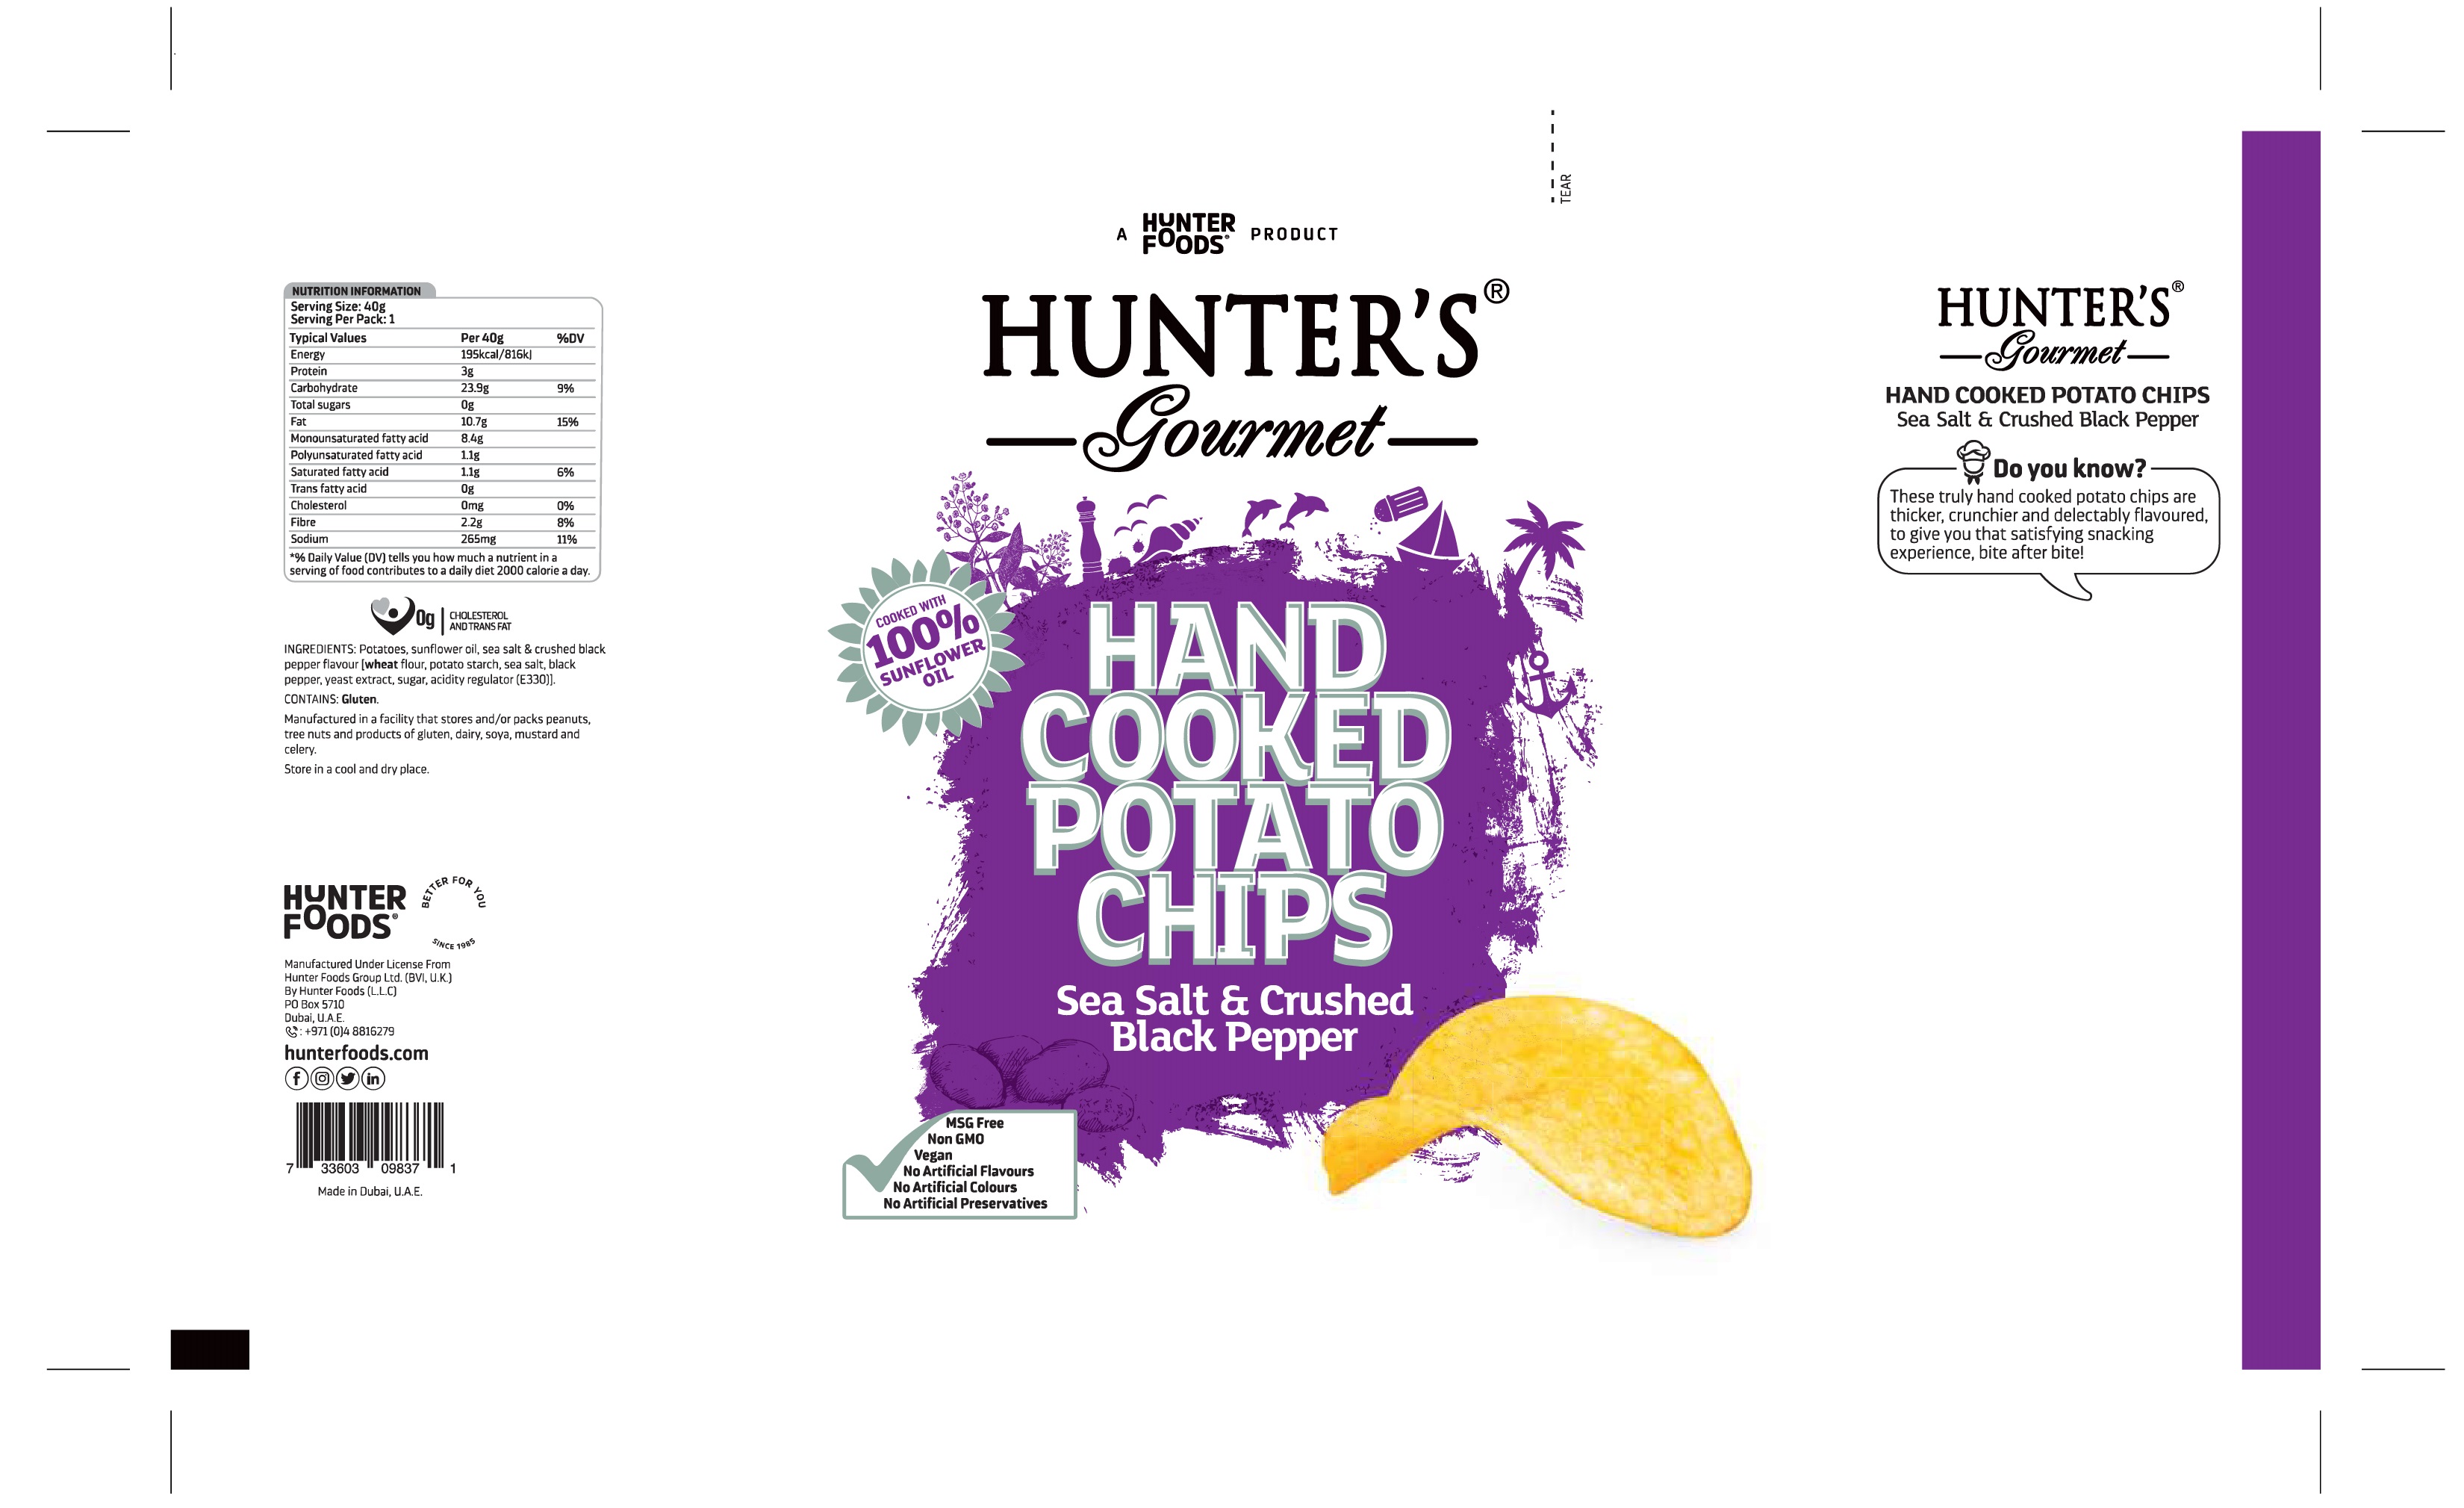 Hunter's Gourmet Hand Cooked Potato Chips Sea Salt & Crushed Black Pepper 24 units per case 40 g Product Label